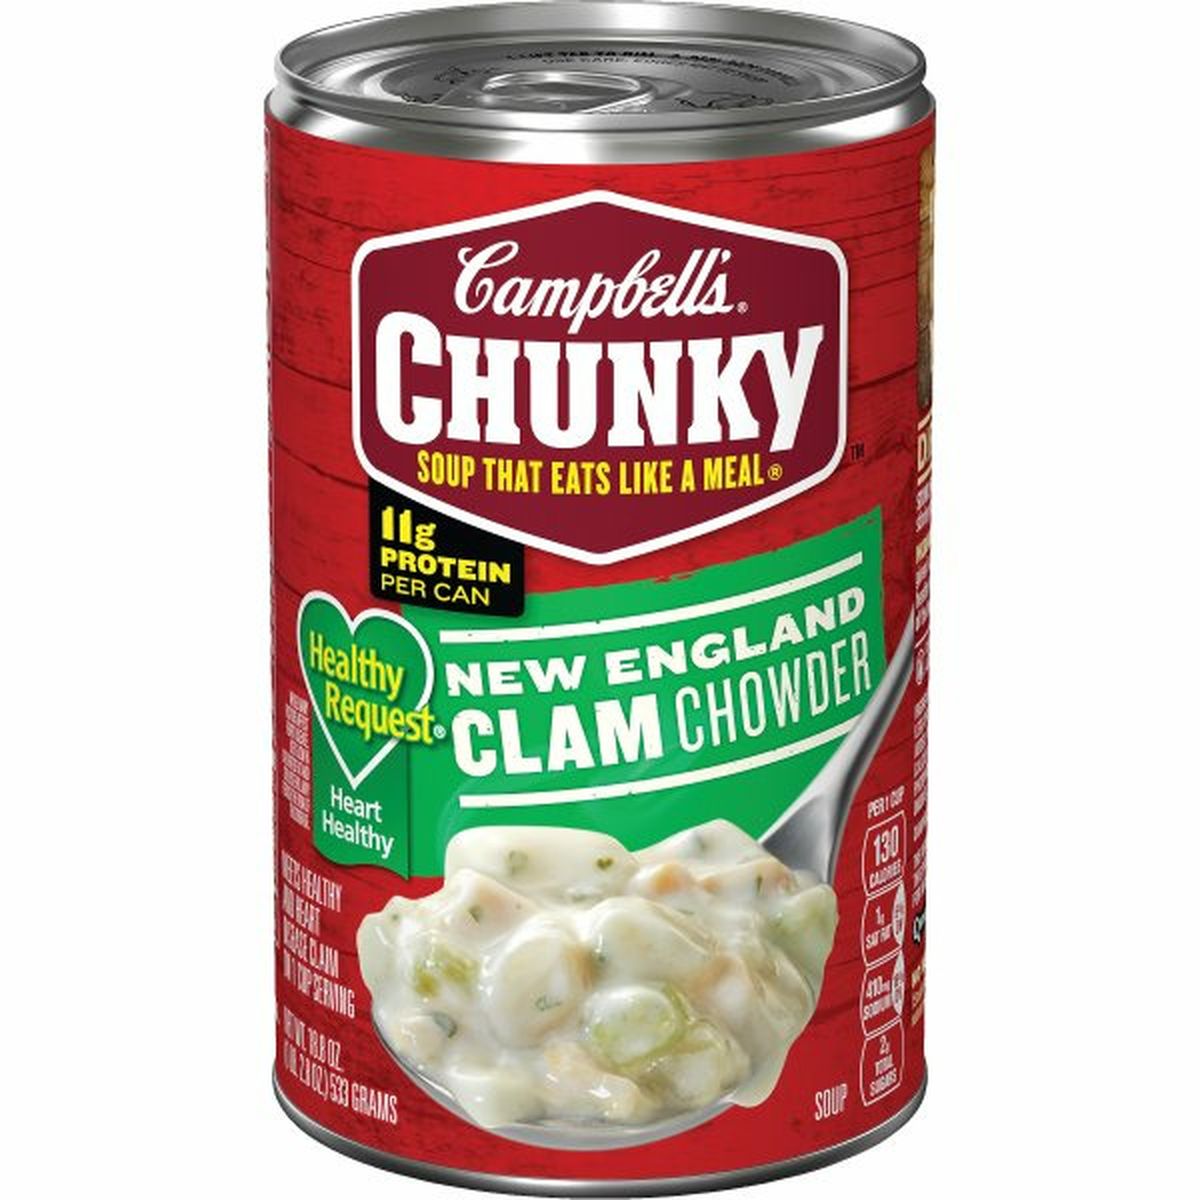 Calories in Campbell'ss Chunkys Healthy Requests Chunky Healthy Request New England Clam Chowder